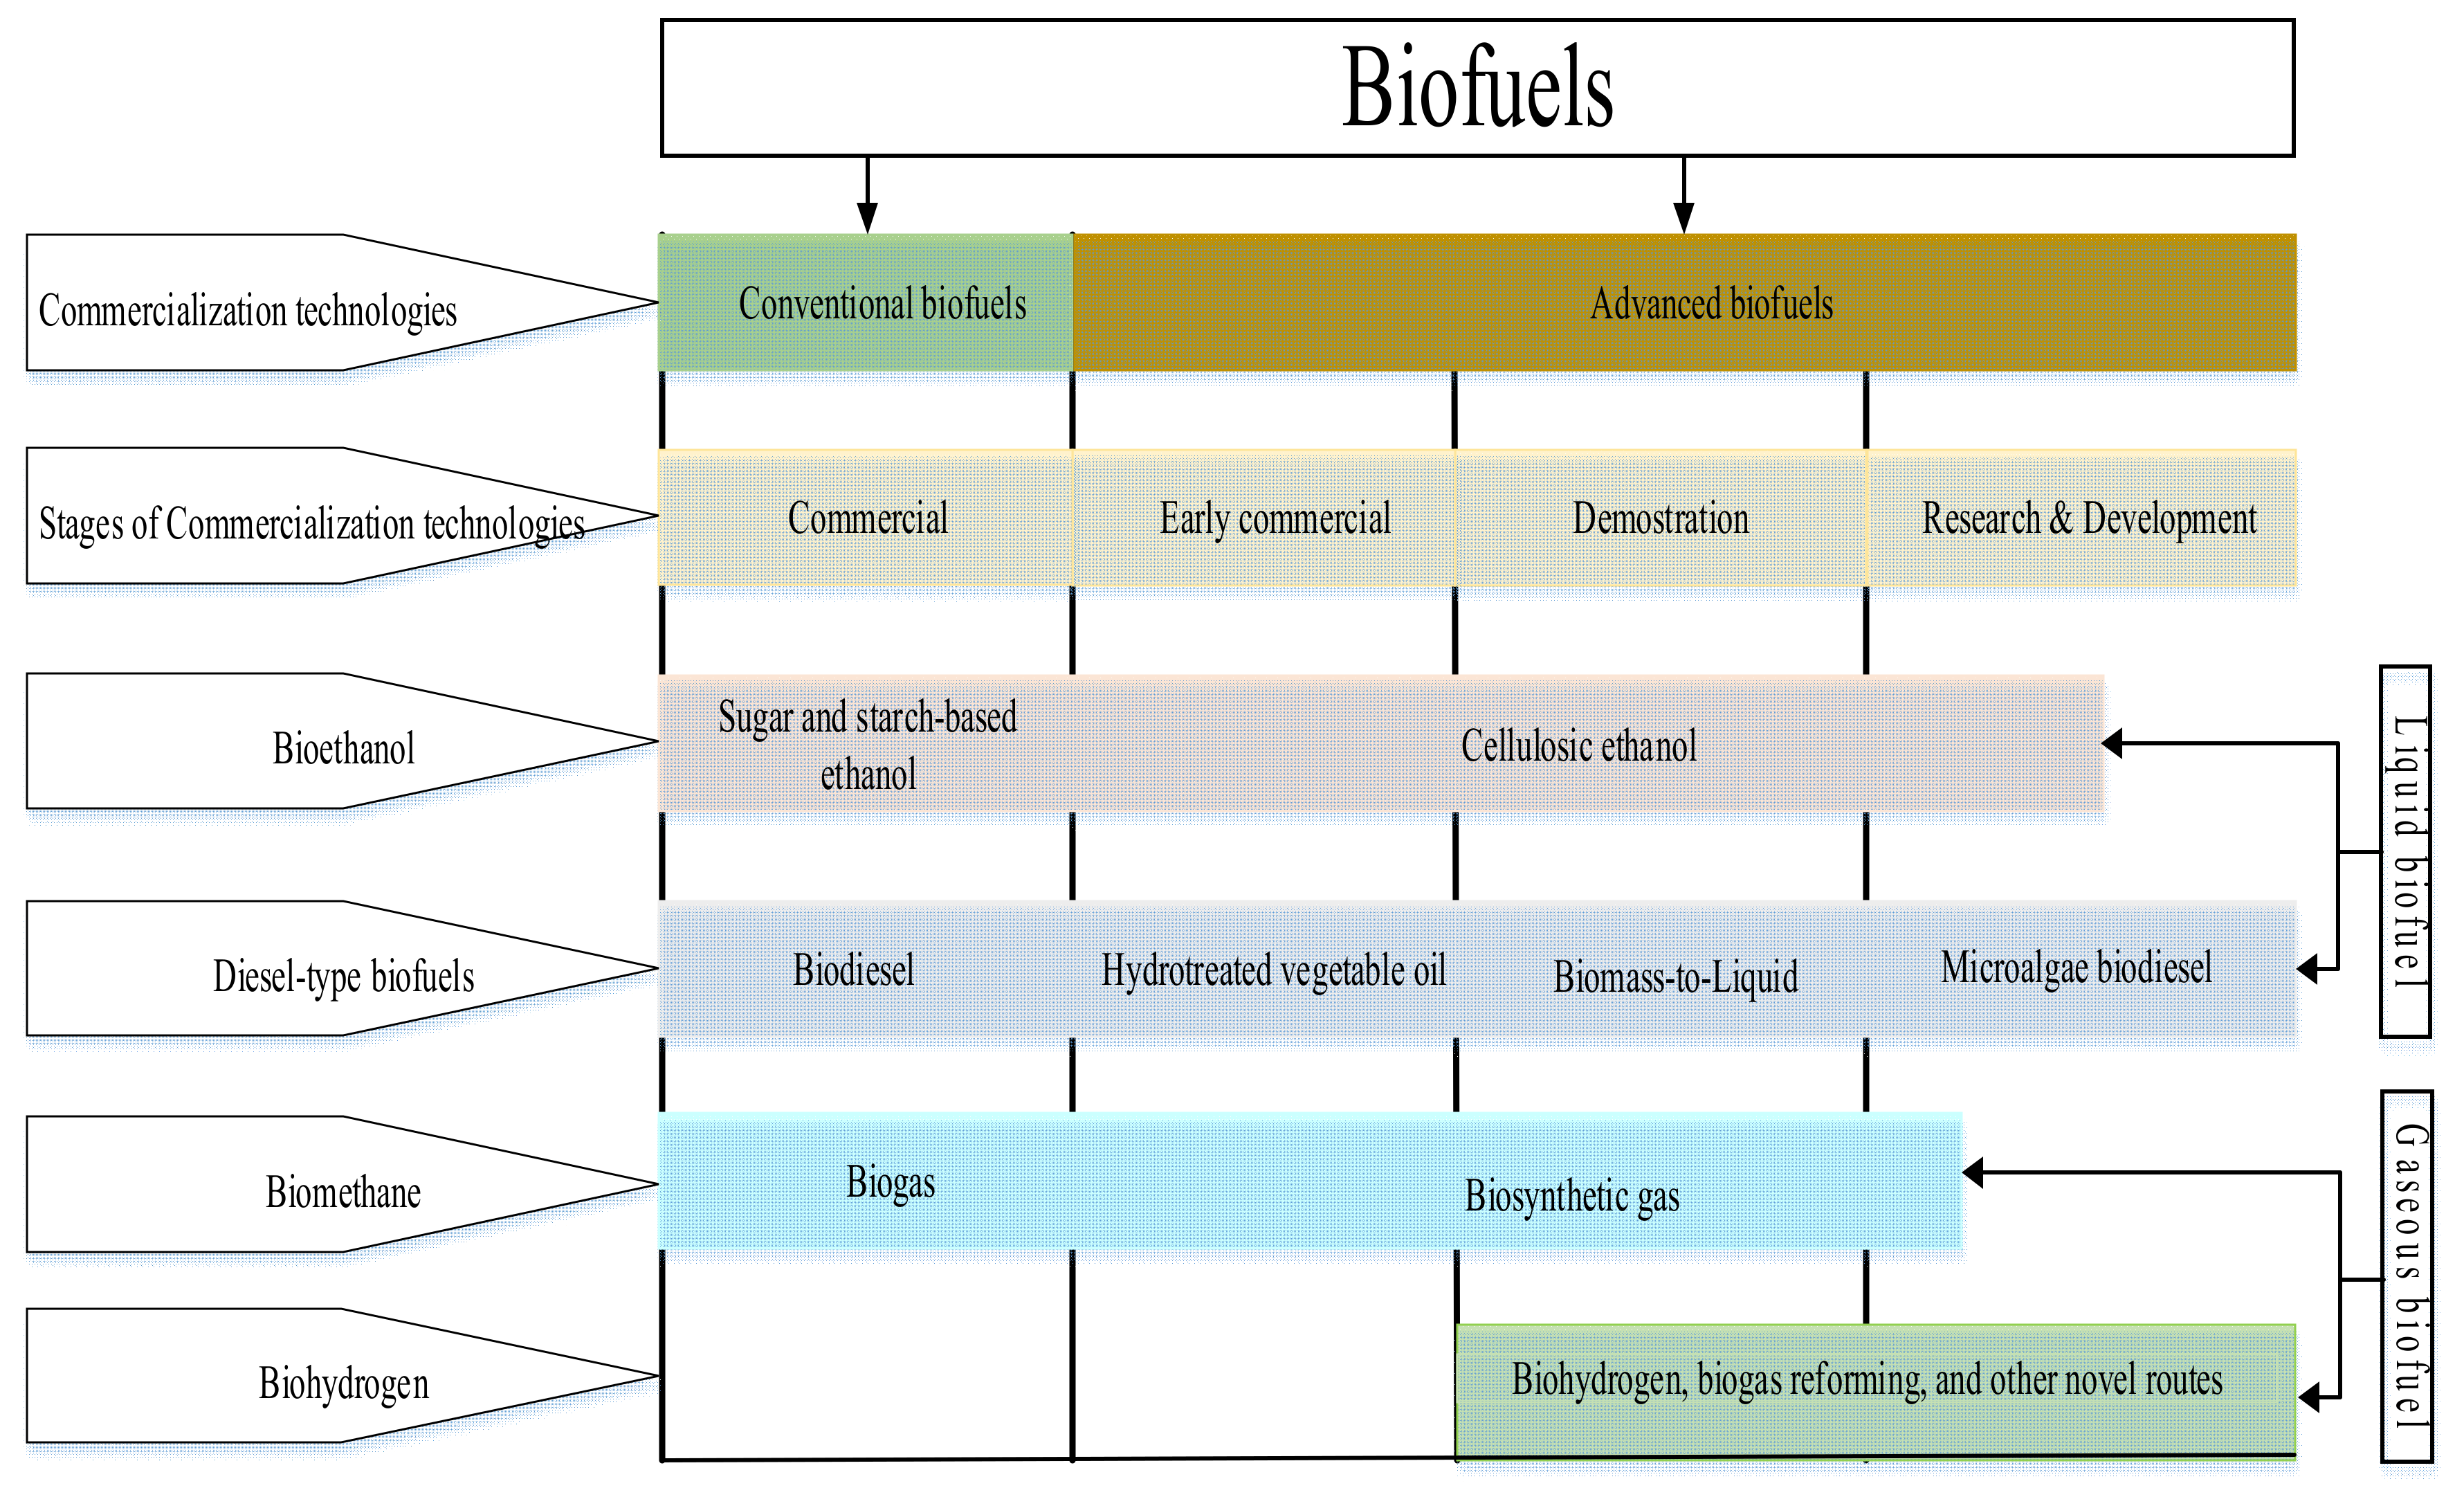 Energies Free Full Text An Overview Of The Classification Production And Utilization Of Biofuels For Internal Combustion Engine Applications Html